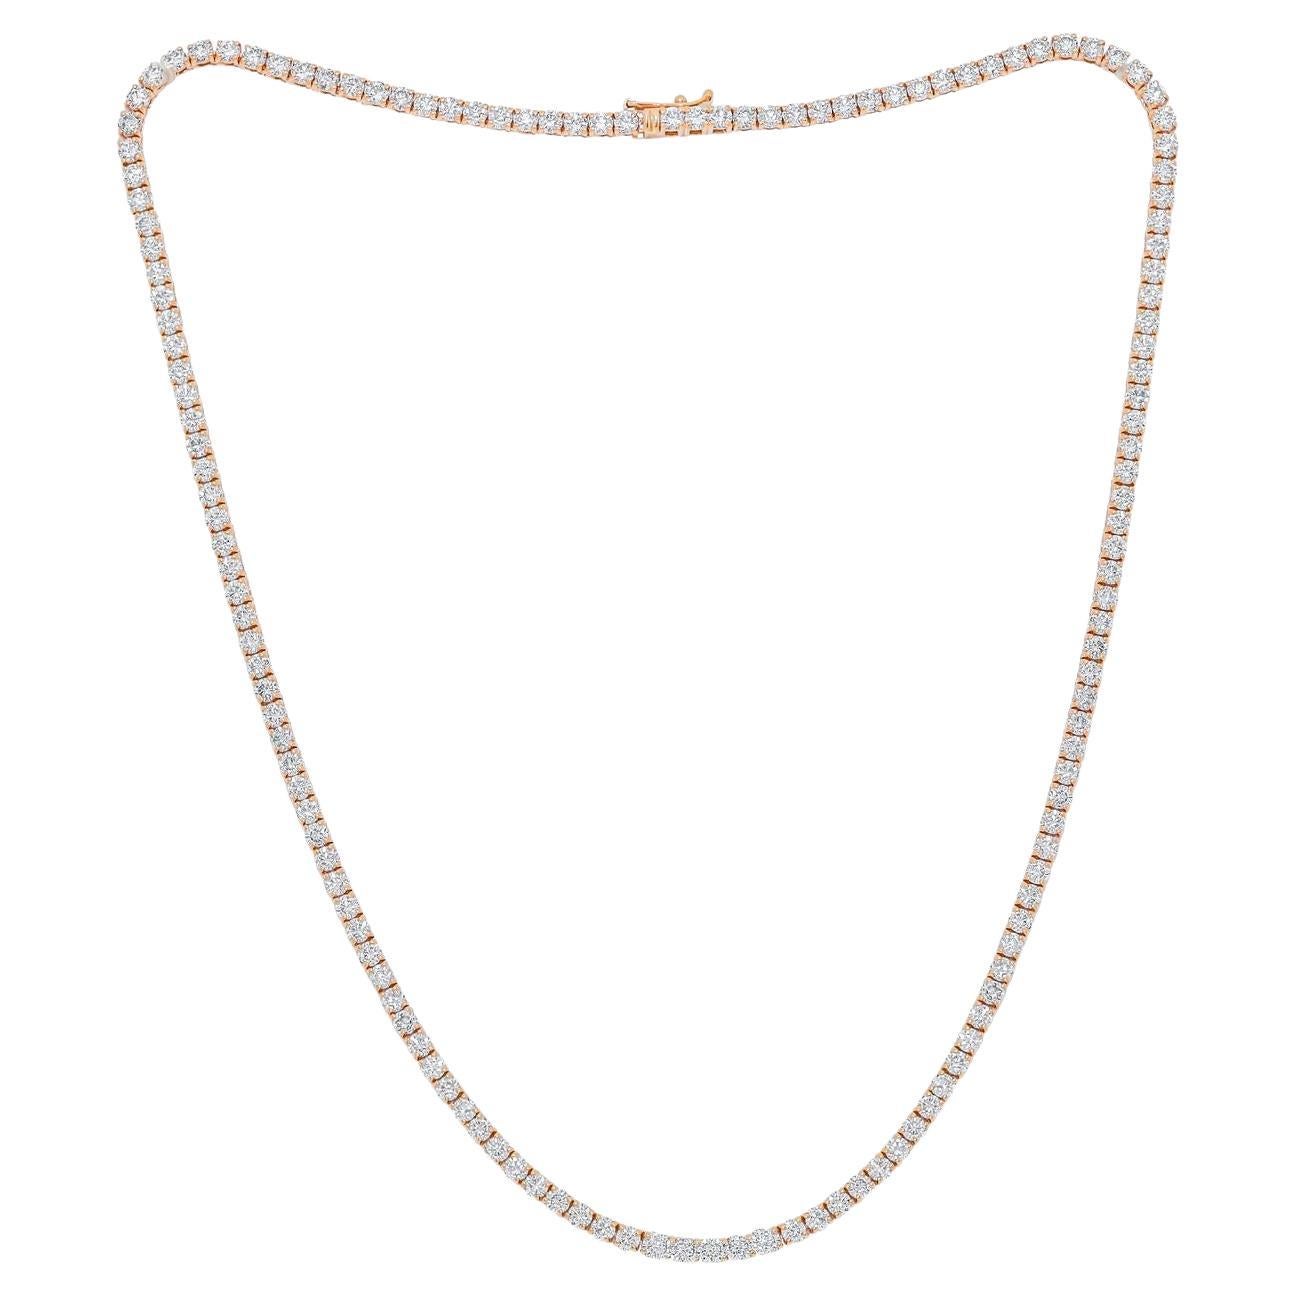 Diana M. 14kt Rose Gold Graduated  Reviera Tennis Necklace Featuring 10.20 cts  For Sale